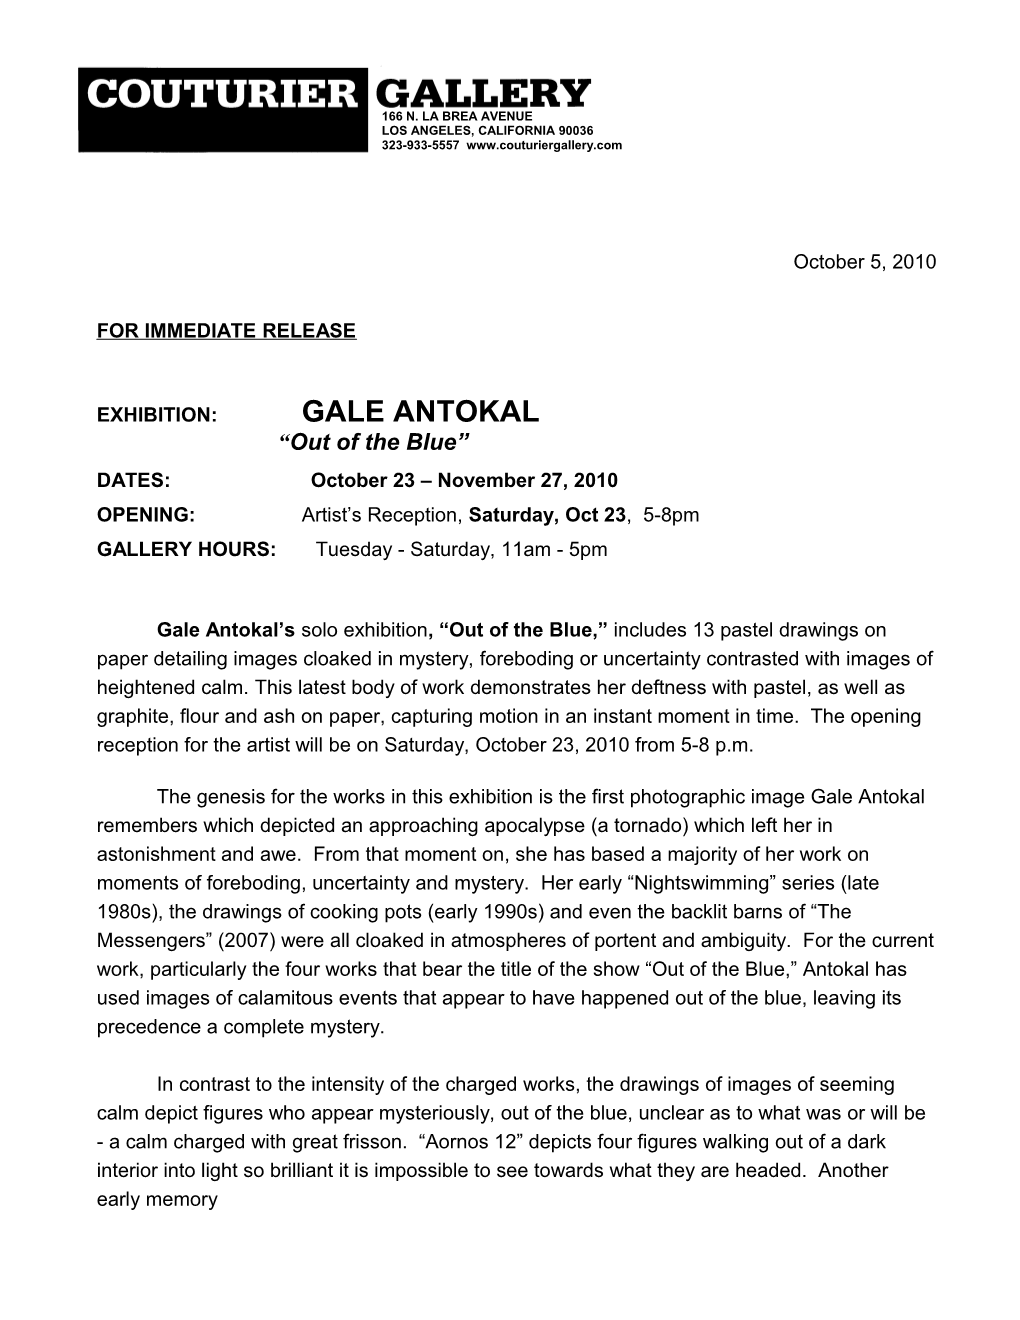 Antokal out of the Blue Press Release / Page 2 of 2